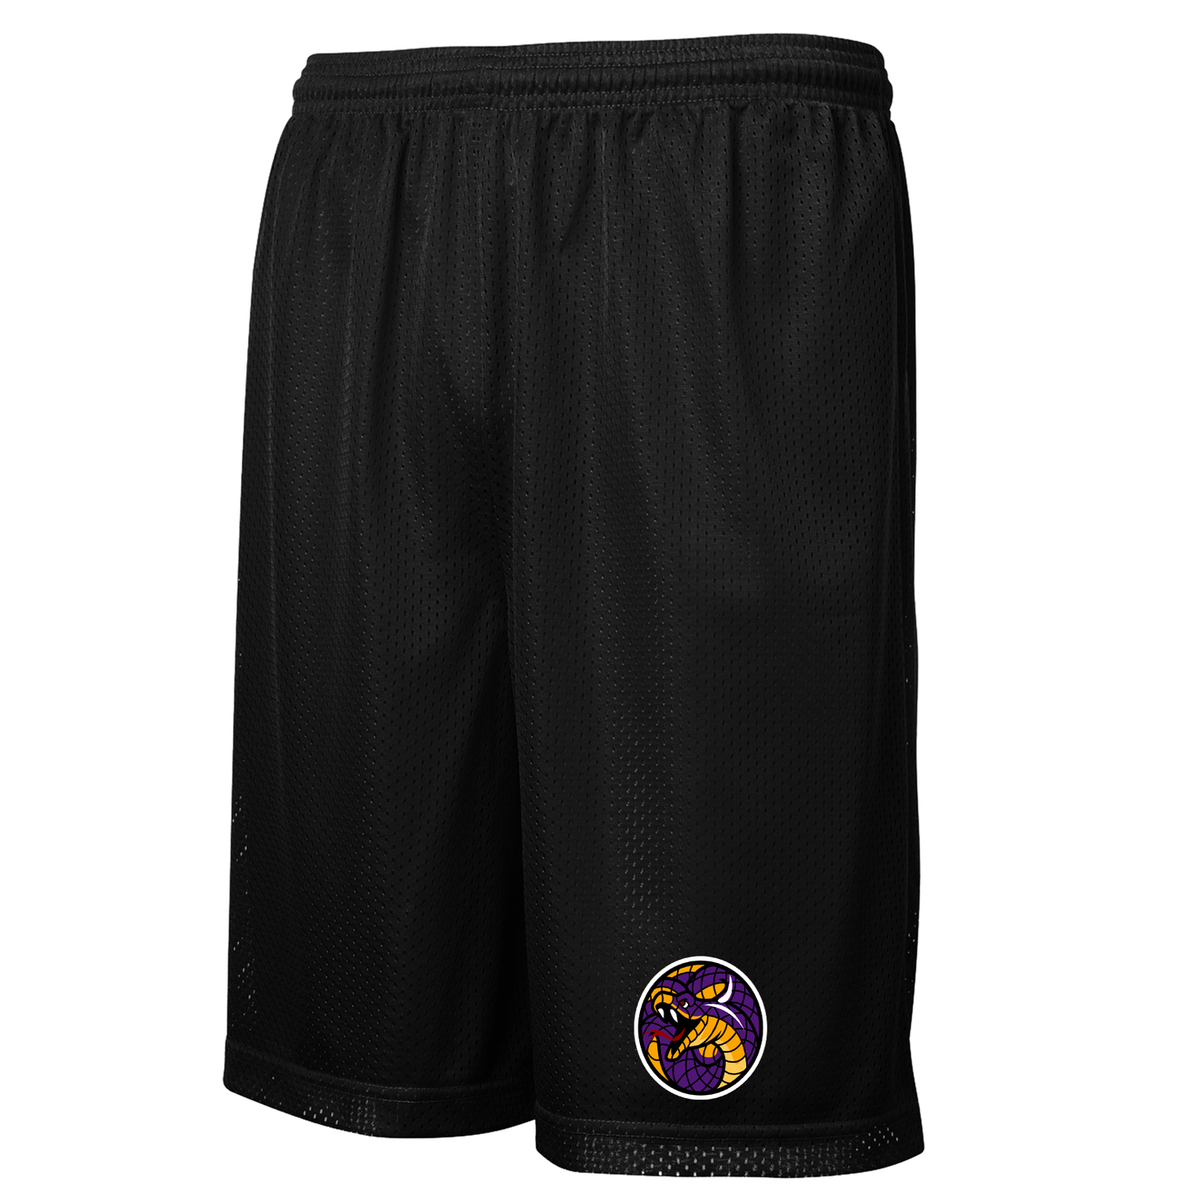 Mambas Basketball Classic Mesh Shorts (Available in Youth Sizes)